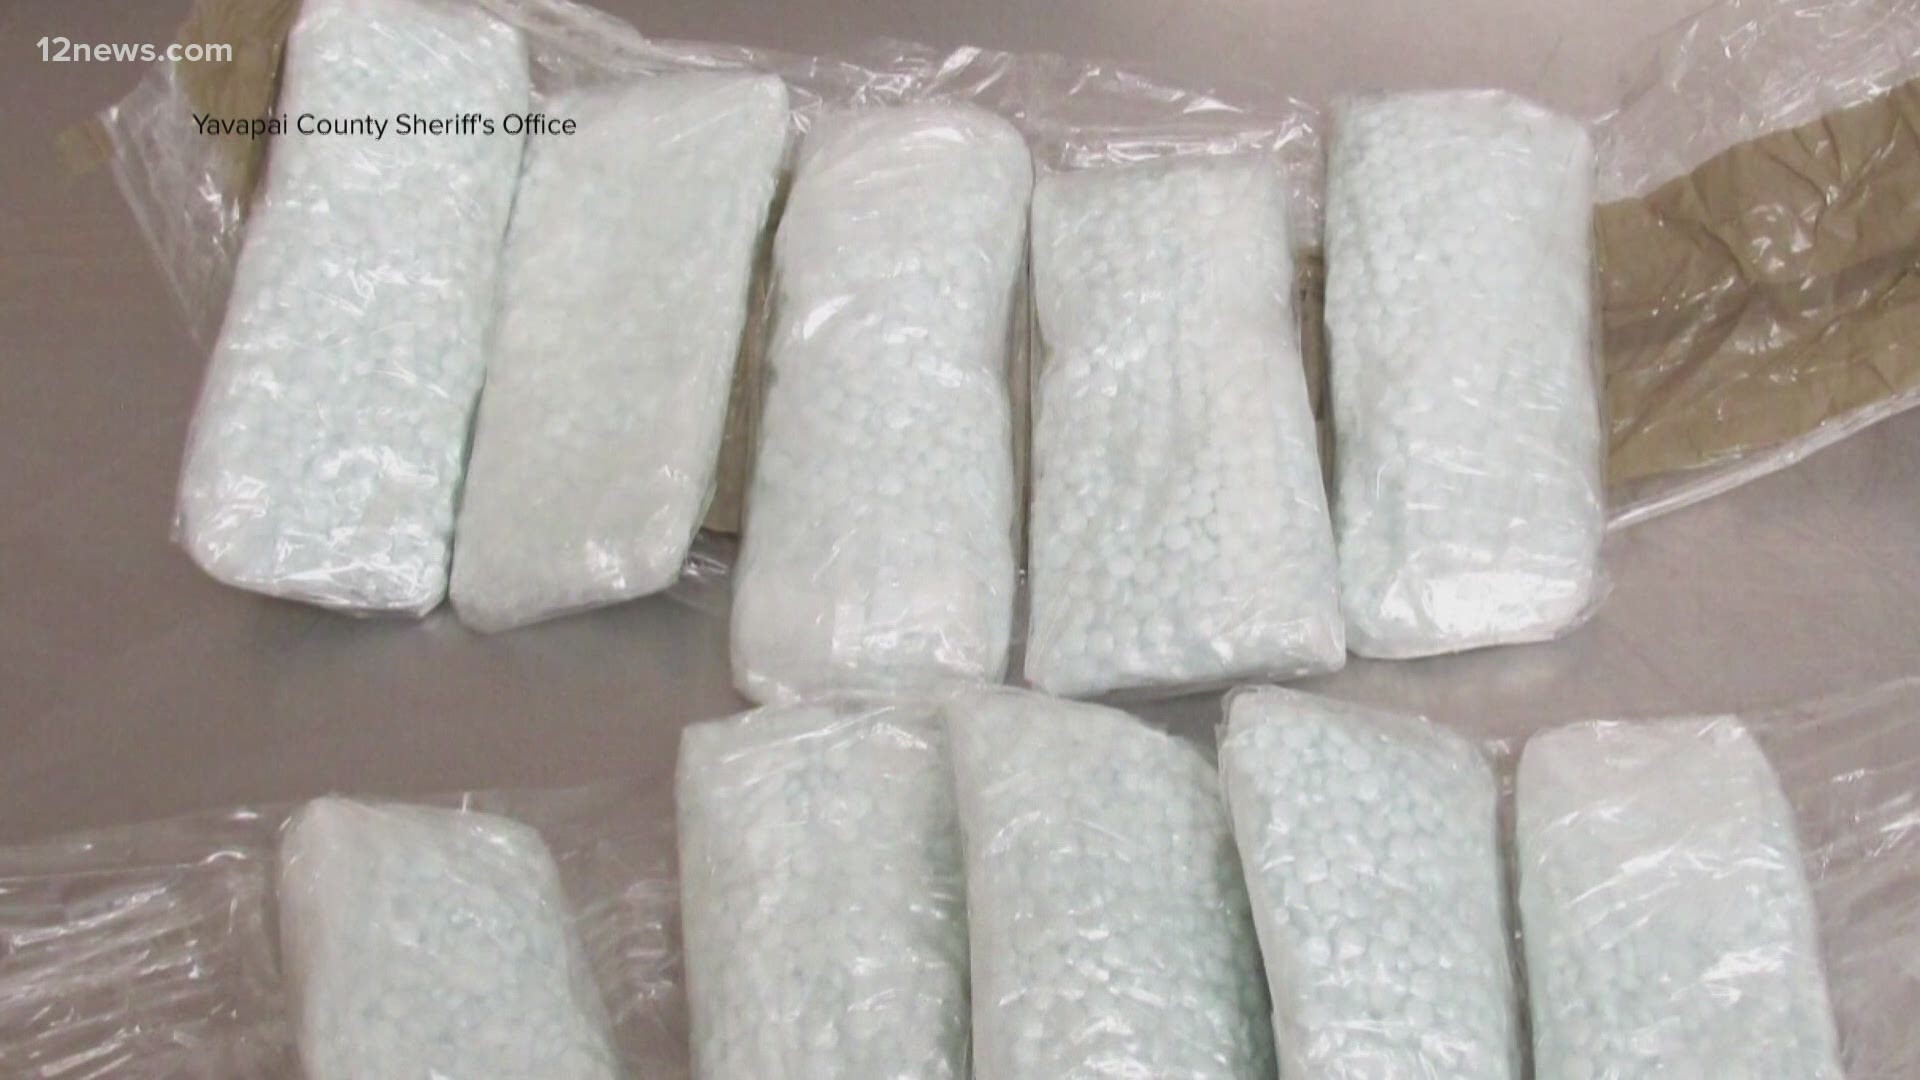 It takes 2mg to kill a person. This new variant of fentanyl is believed to be made by cartels in Mexico.